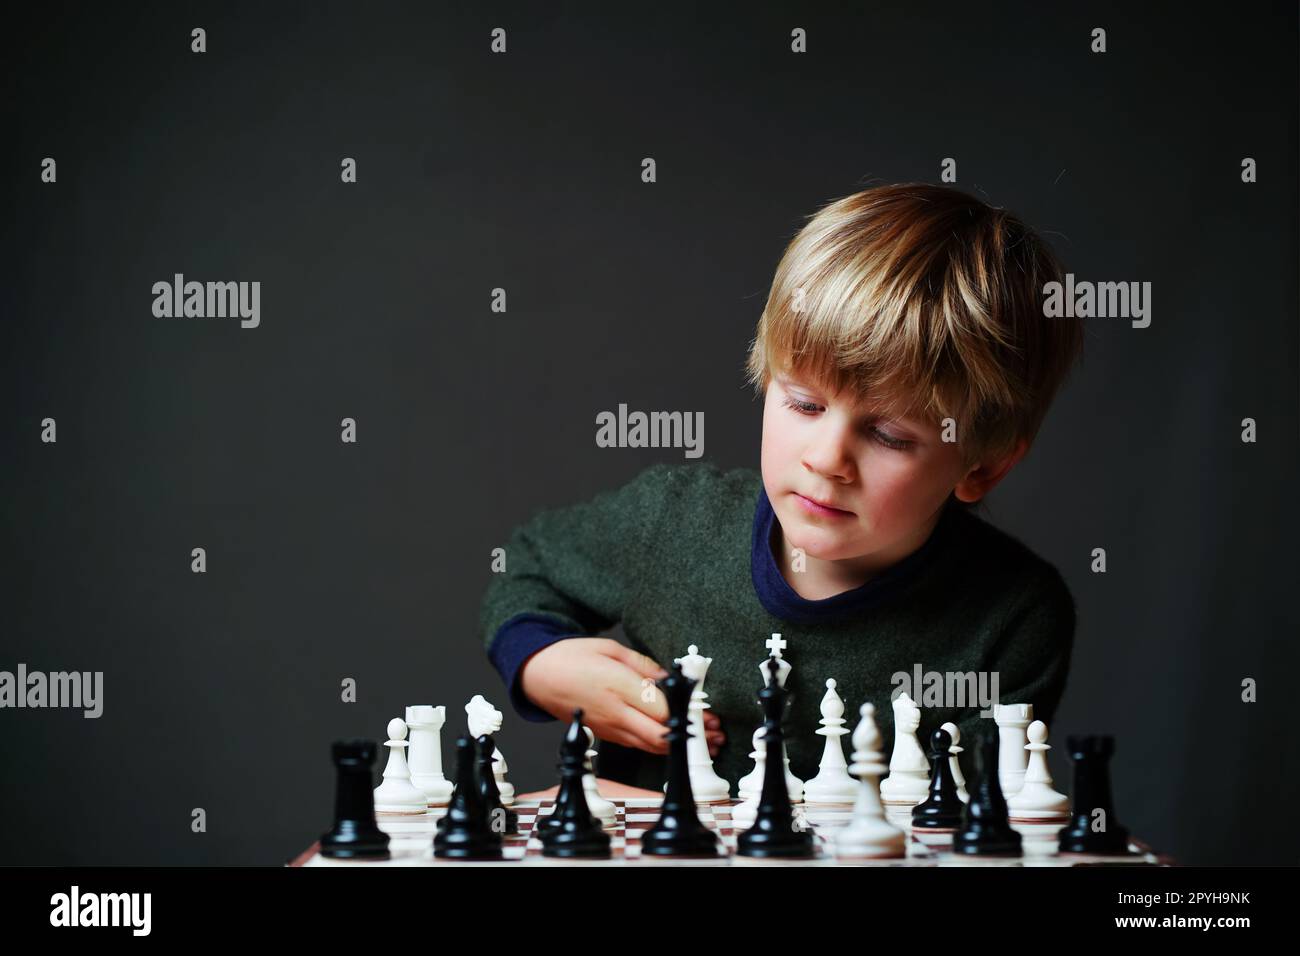 Premium Photo  Portrait of child during chess game boy plays chess and  thinks intently about the next move isolation on white background